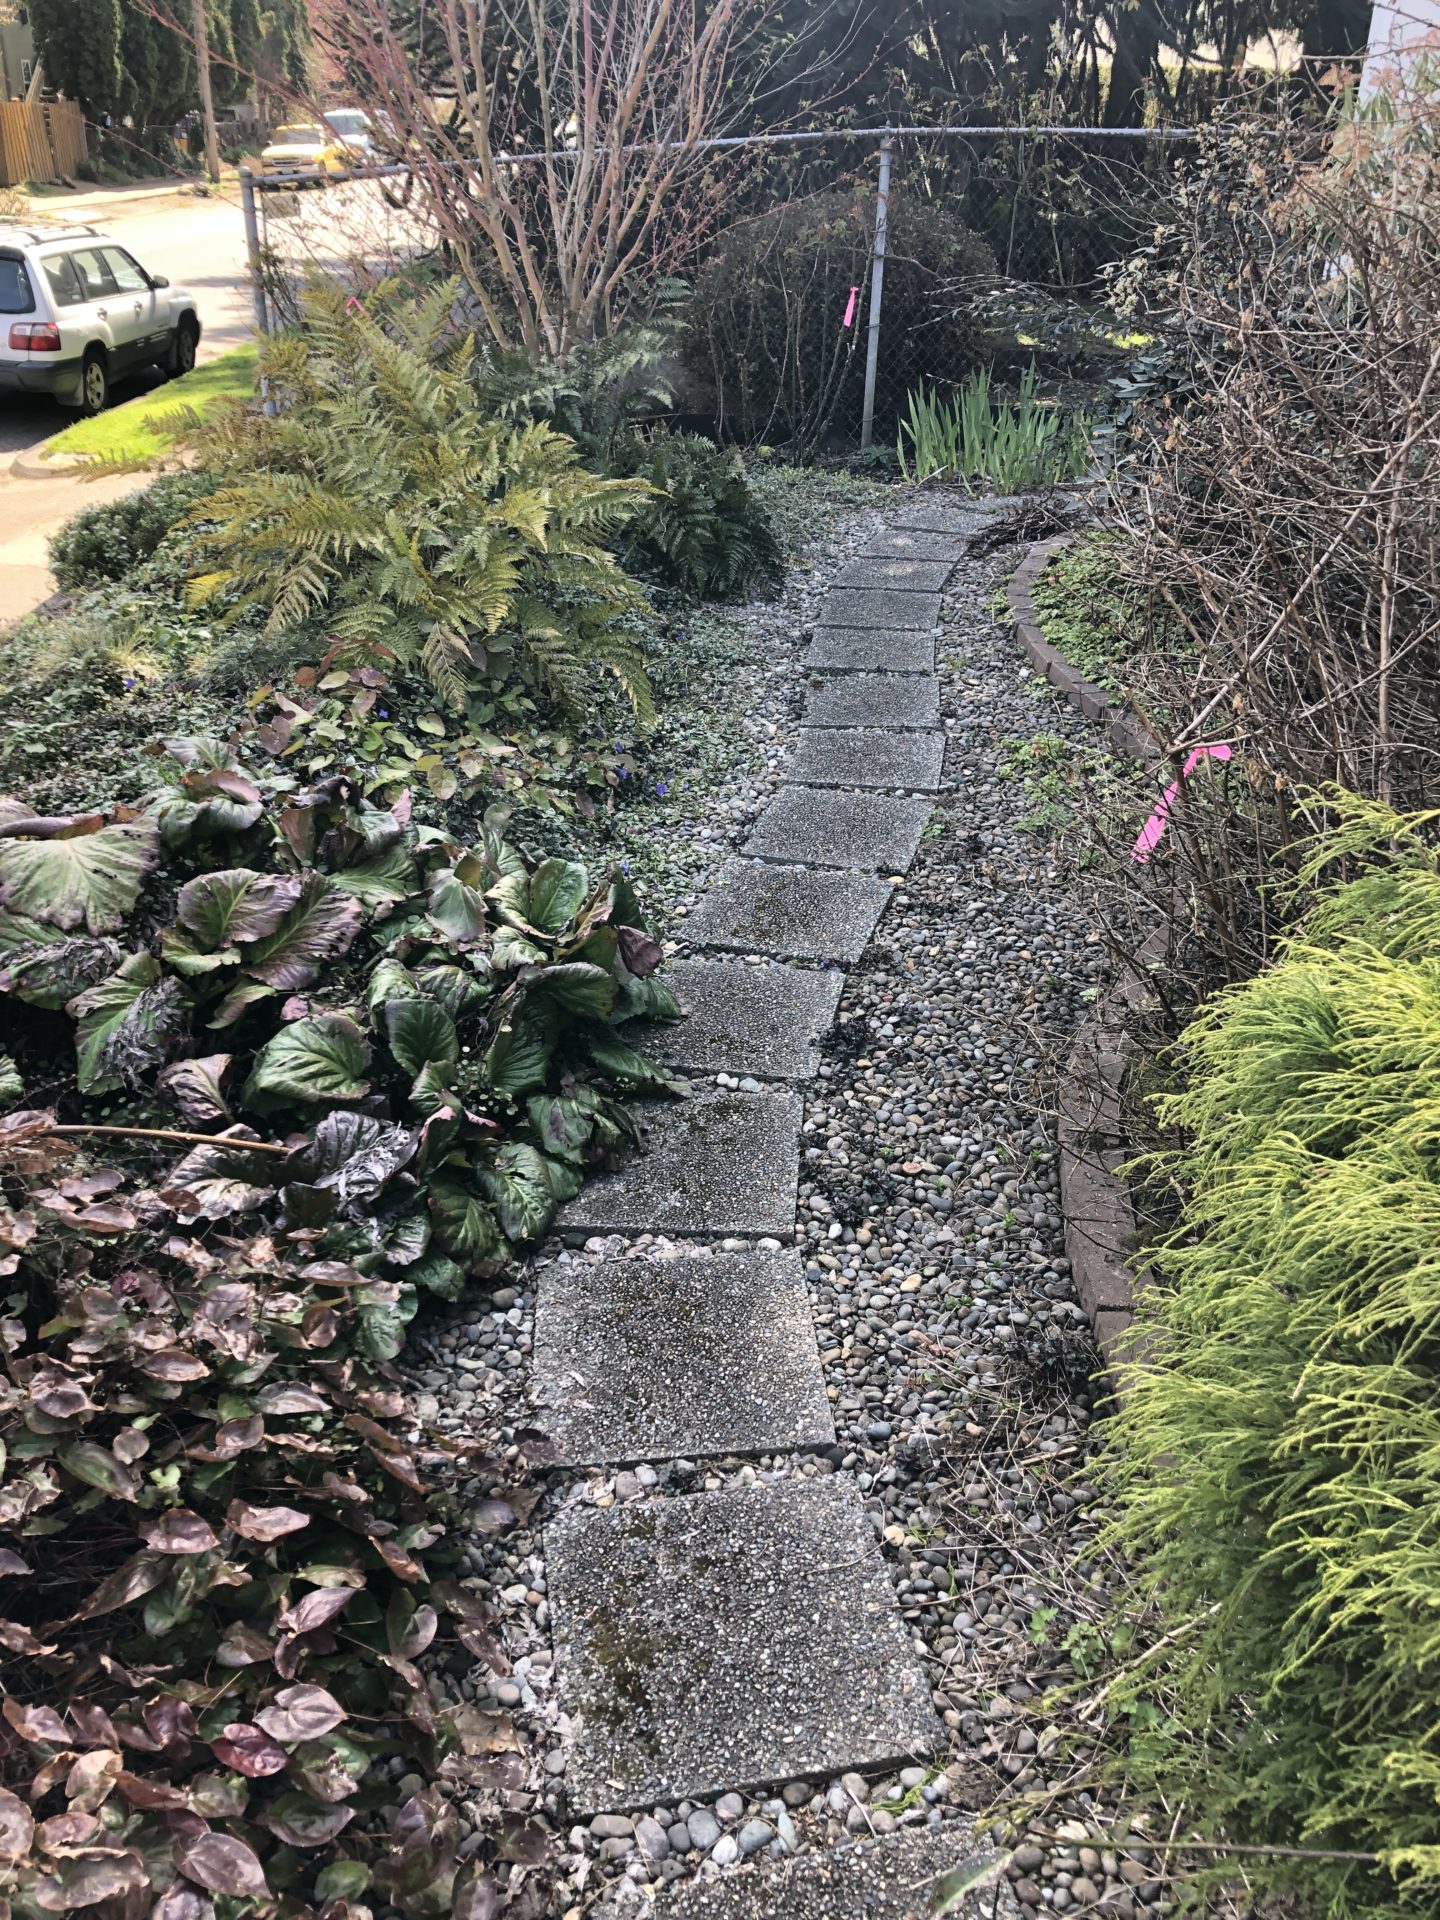 Before photo shows a path that subtracts beauty from a landscape in this Portland residential neighborhood.